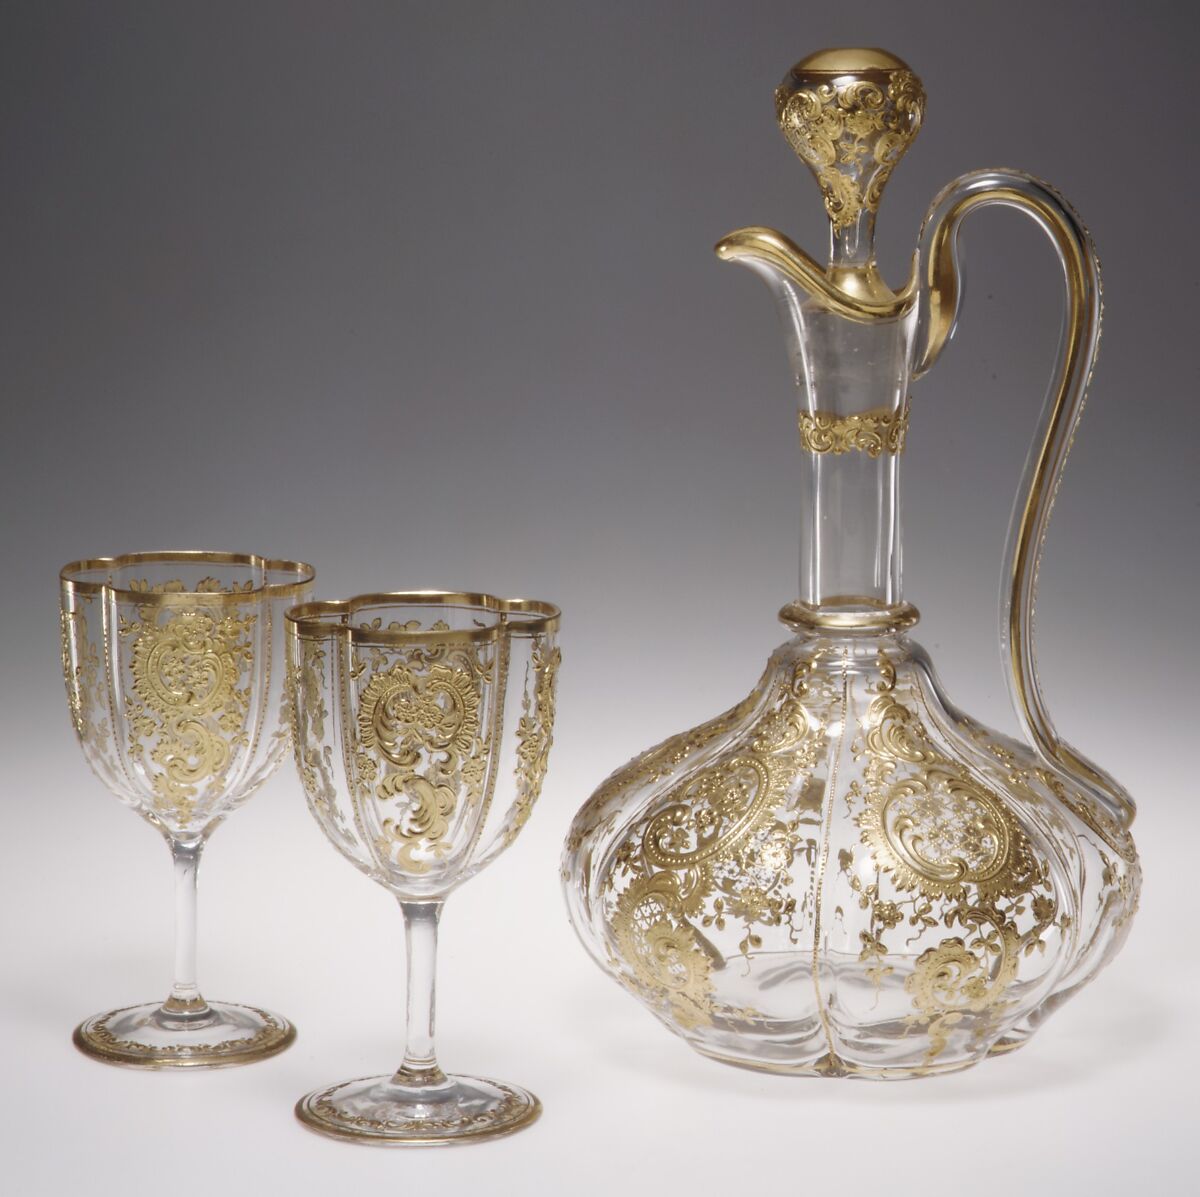 Wineglass (part of a service), Glass, gold, French 